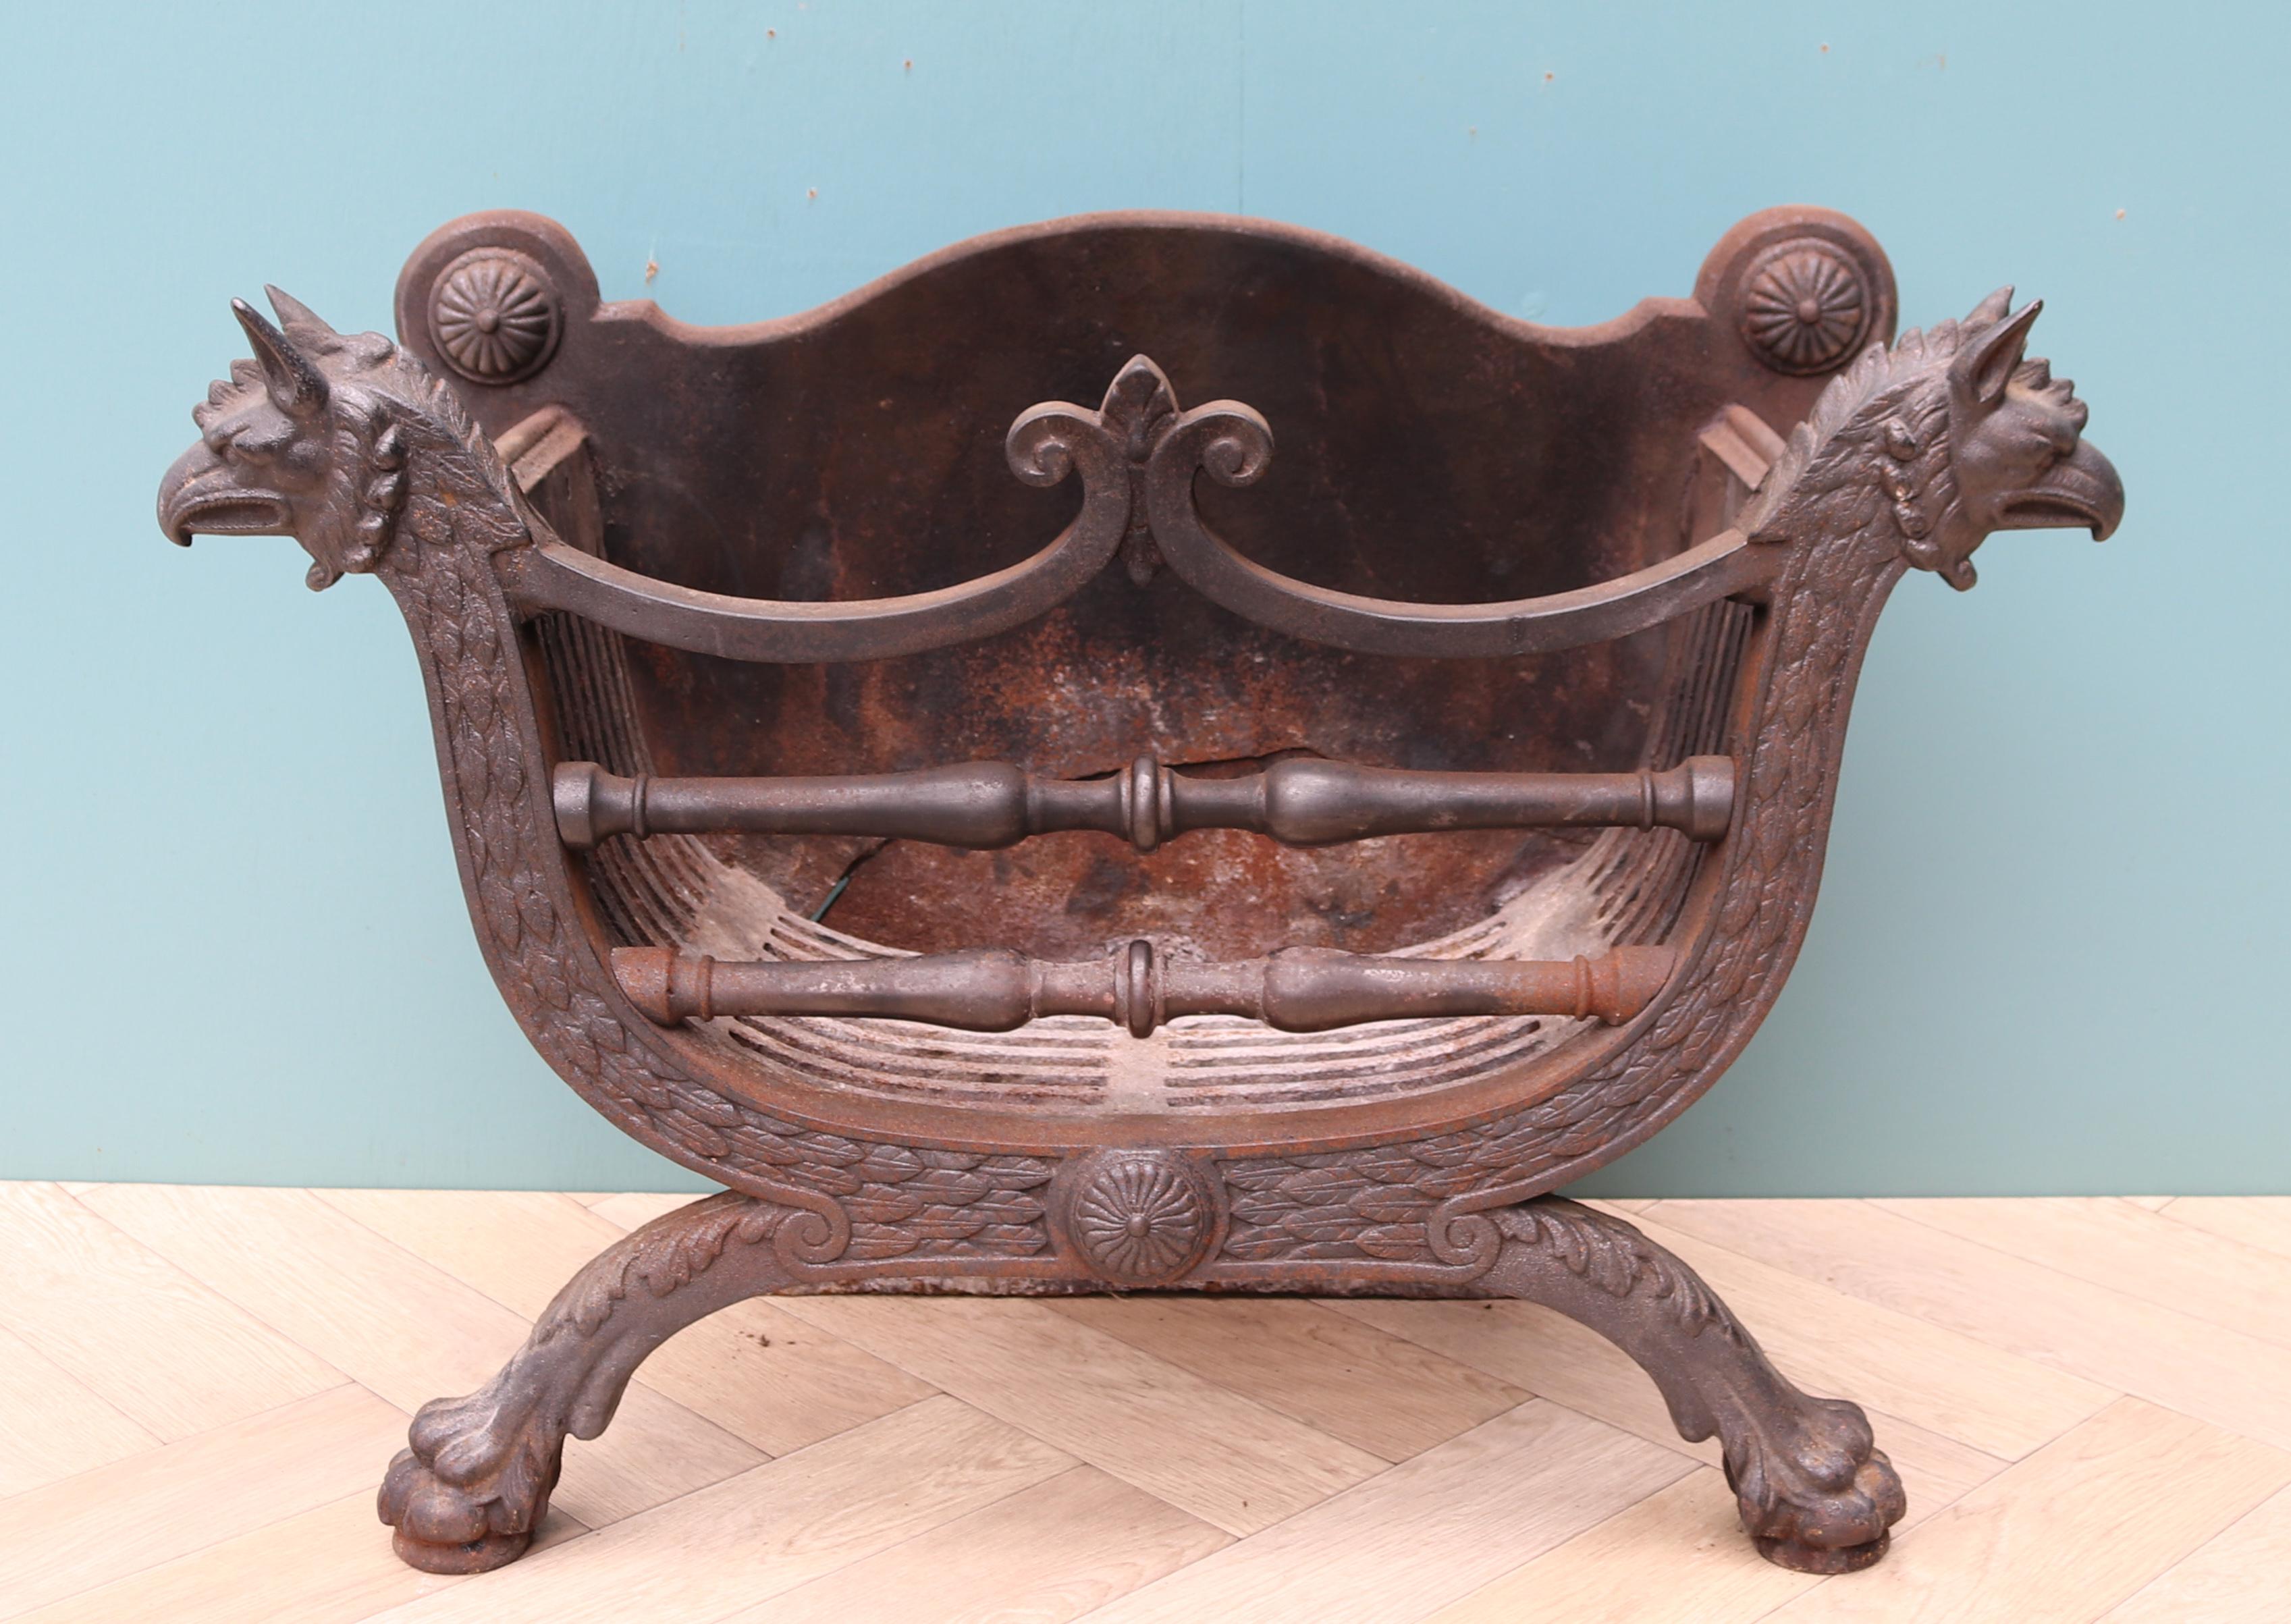 An elegant Regency style cast iron fire basket decorated with griffin heads and feet.